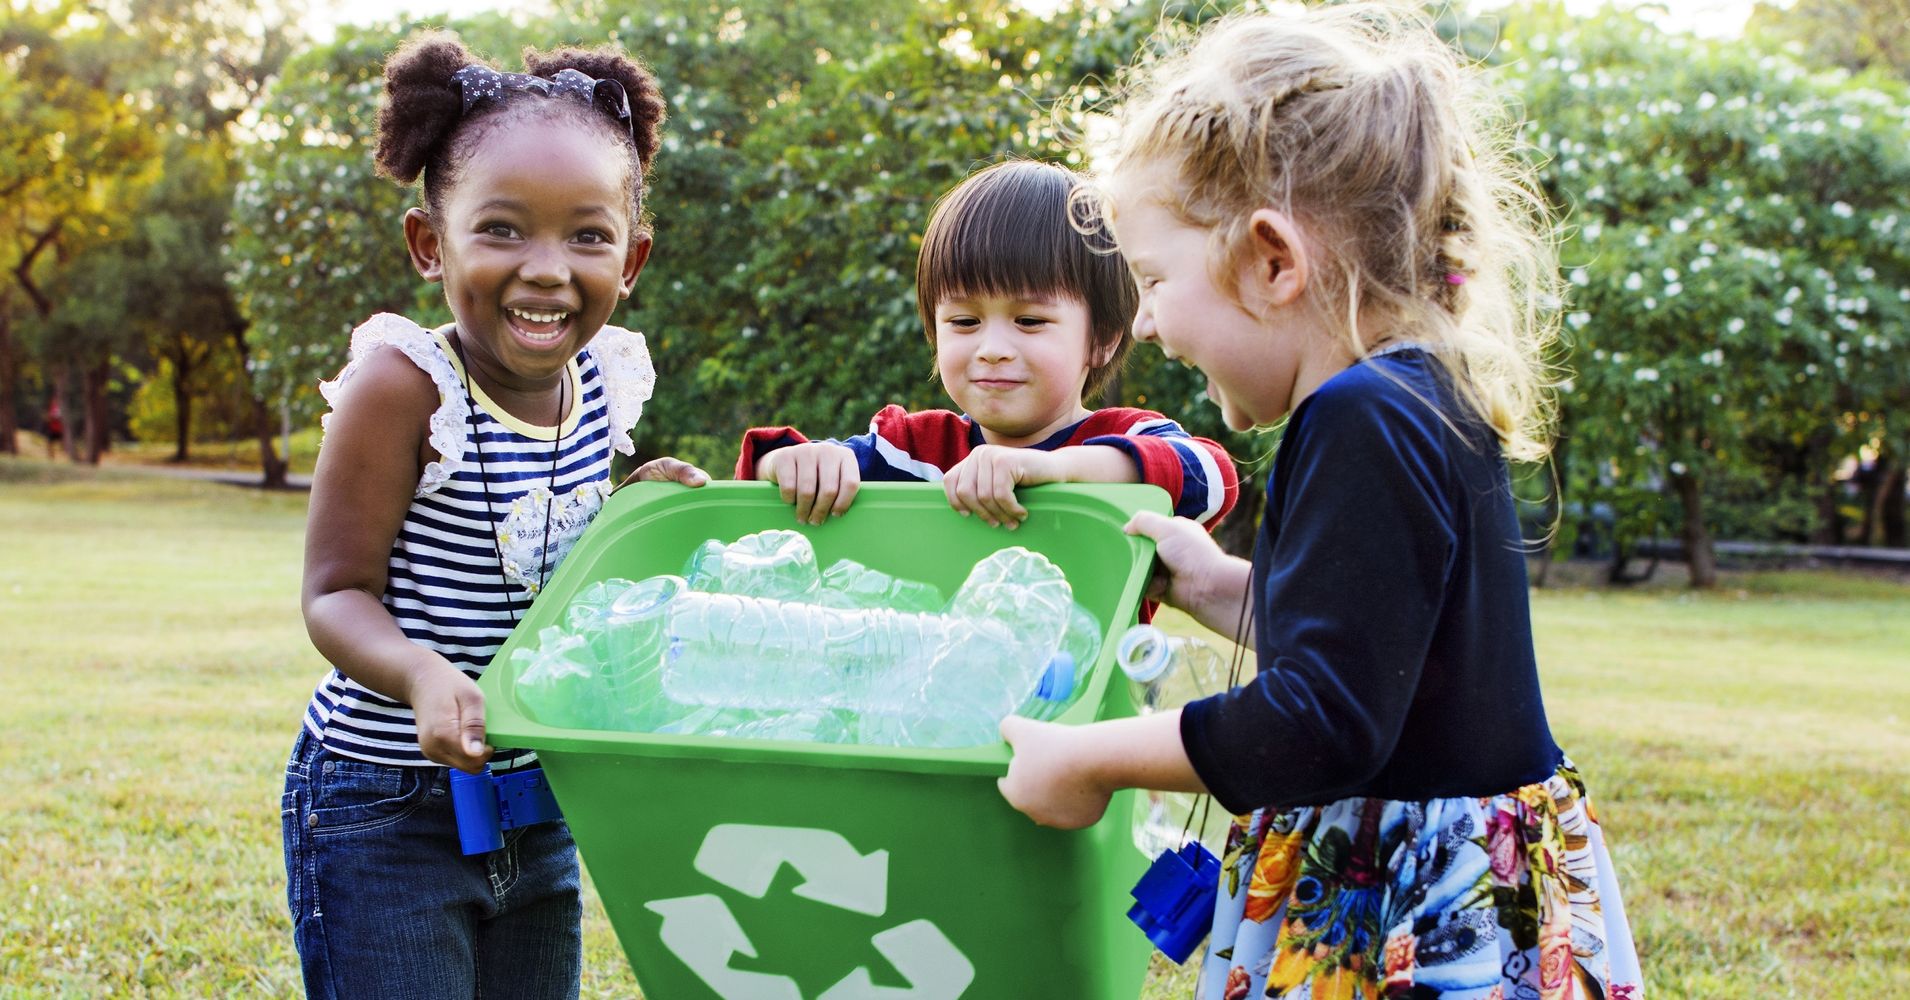 Utilizing Recycling Resources in the Home and Classroom